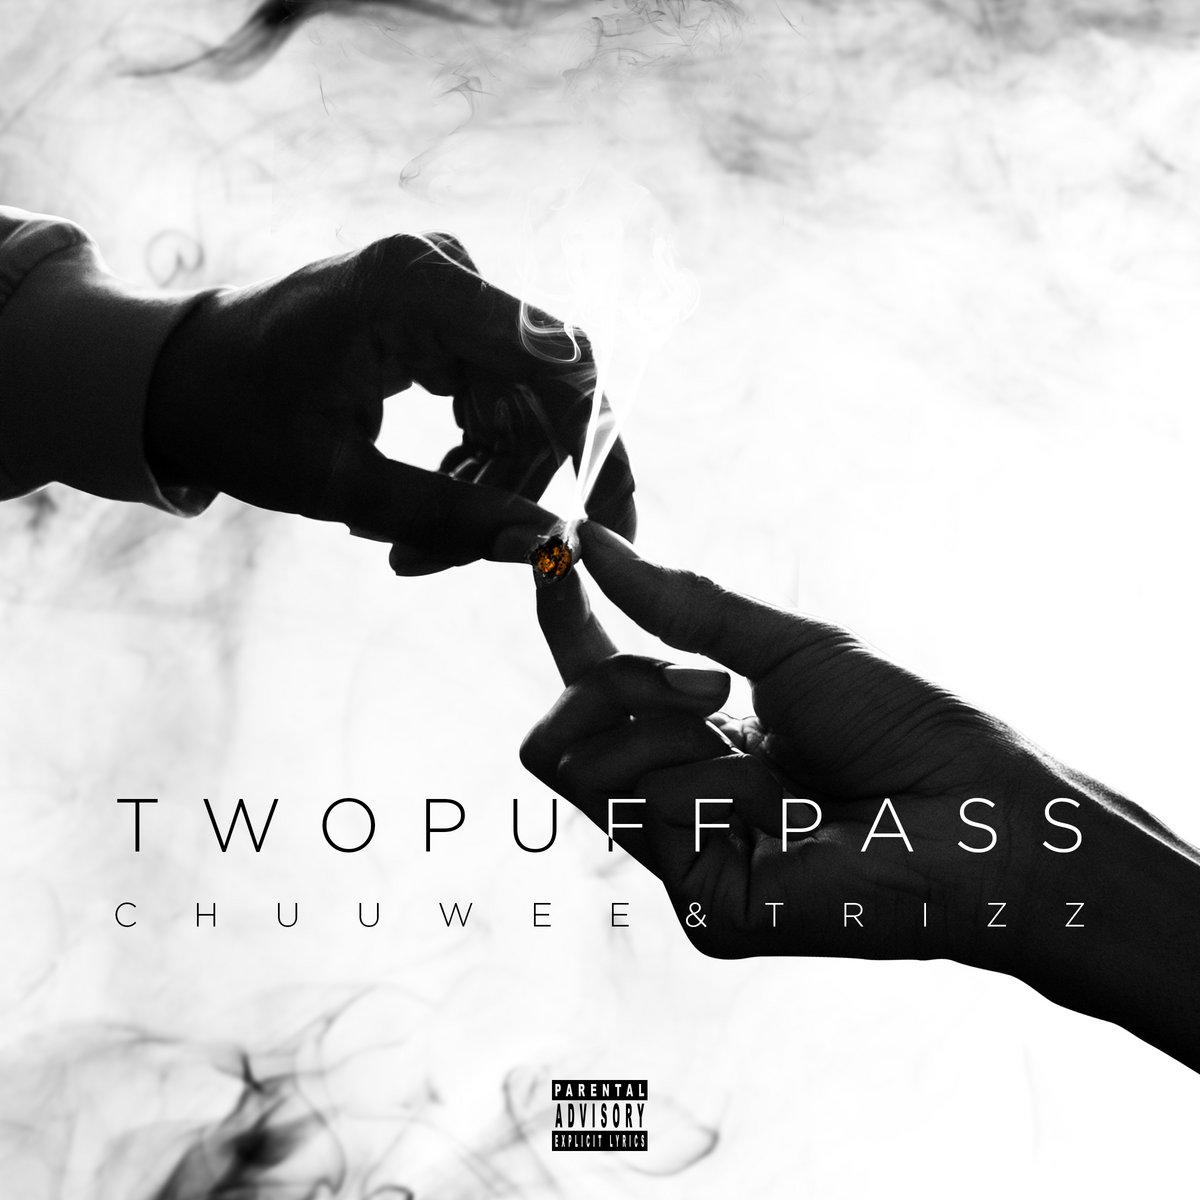 Chuuwee & Trizz - Two Puff Pass